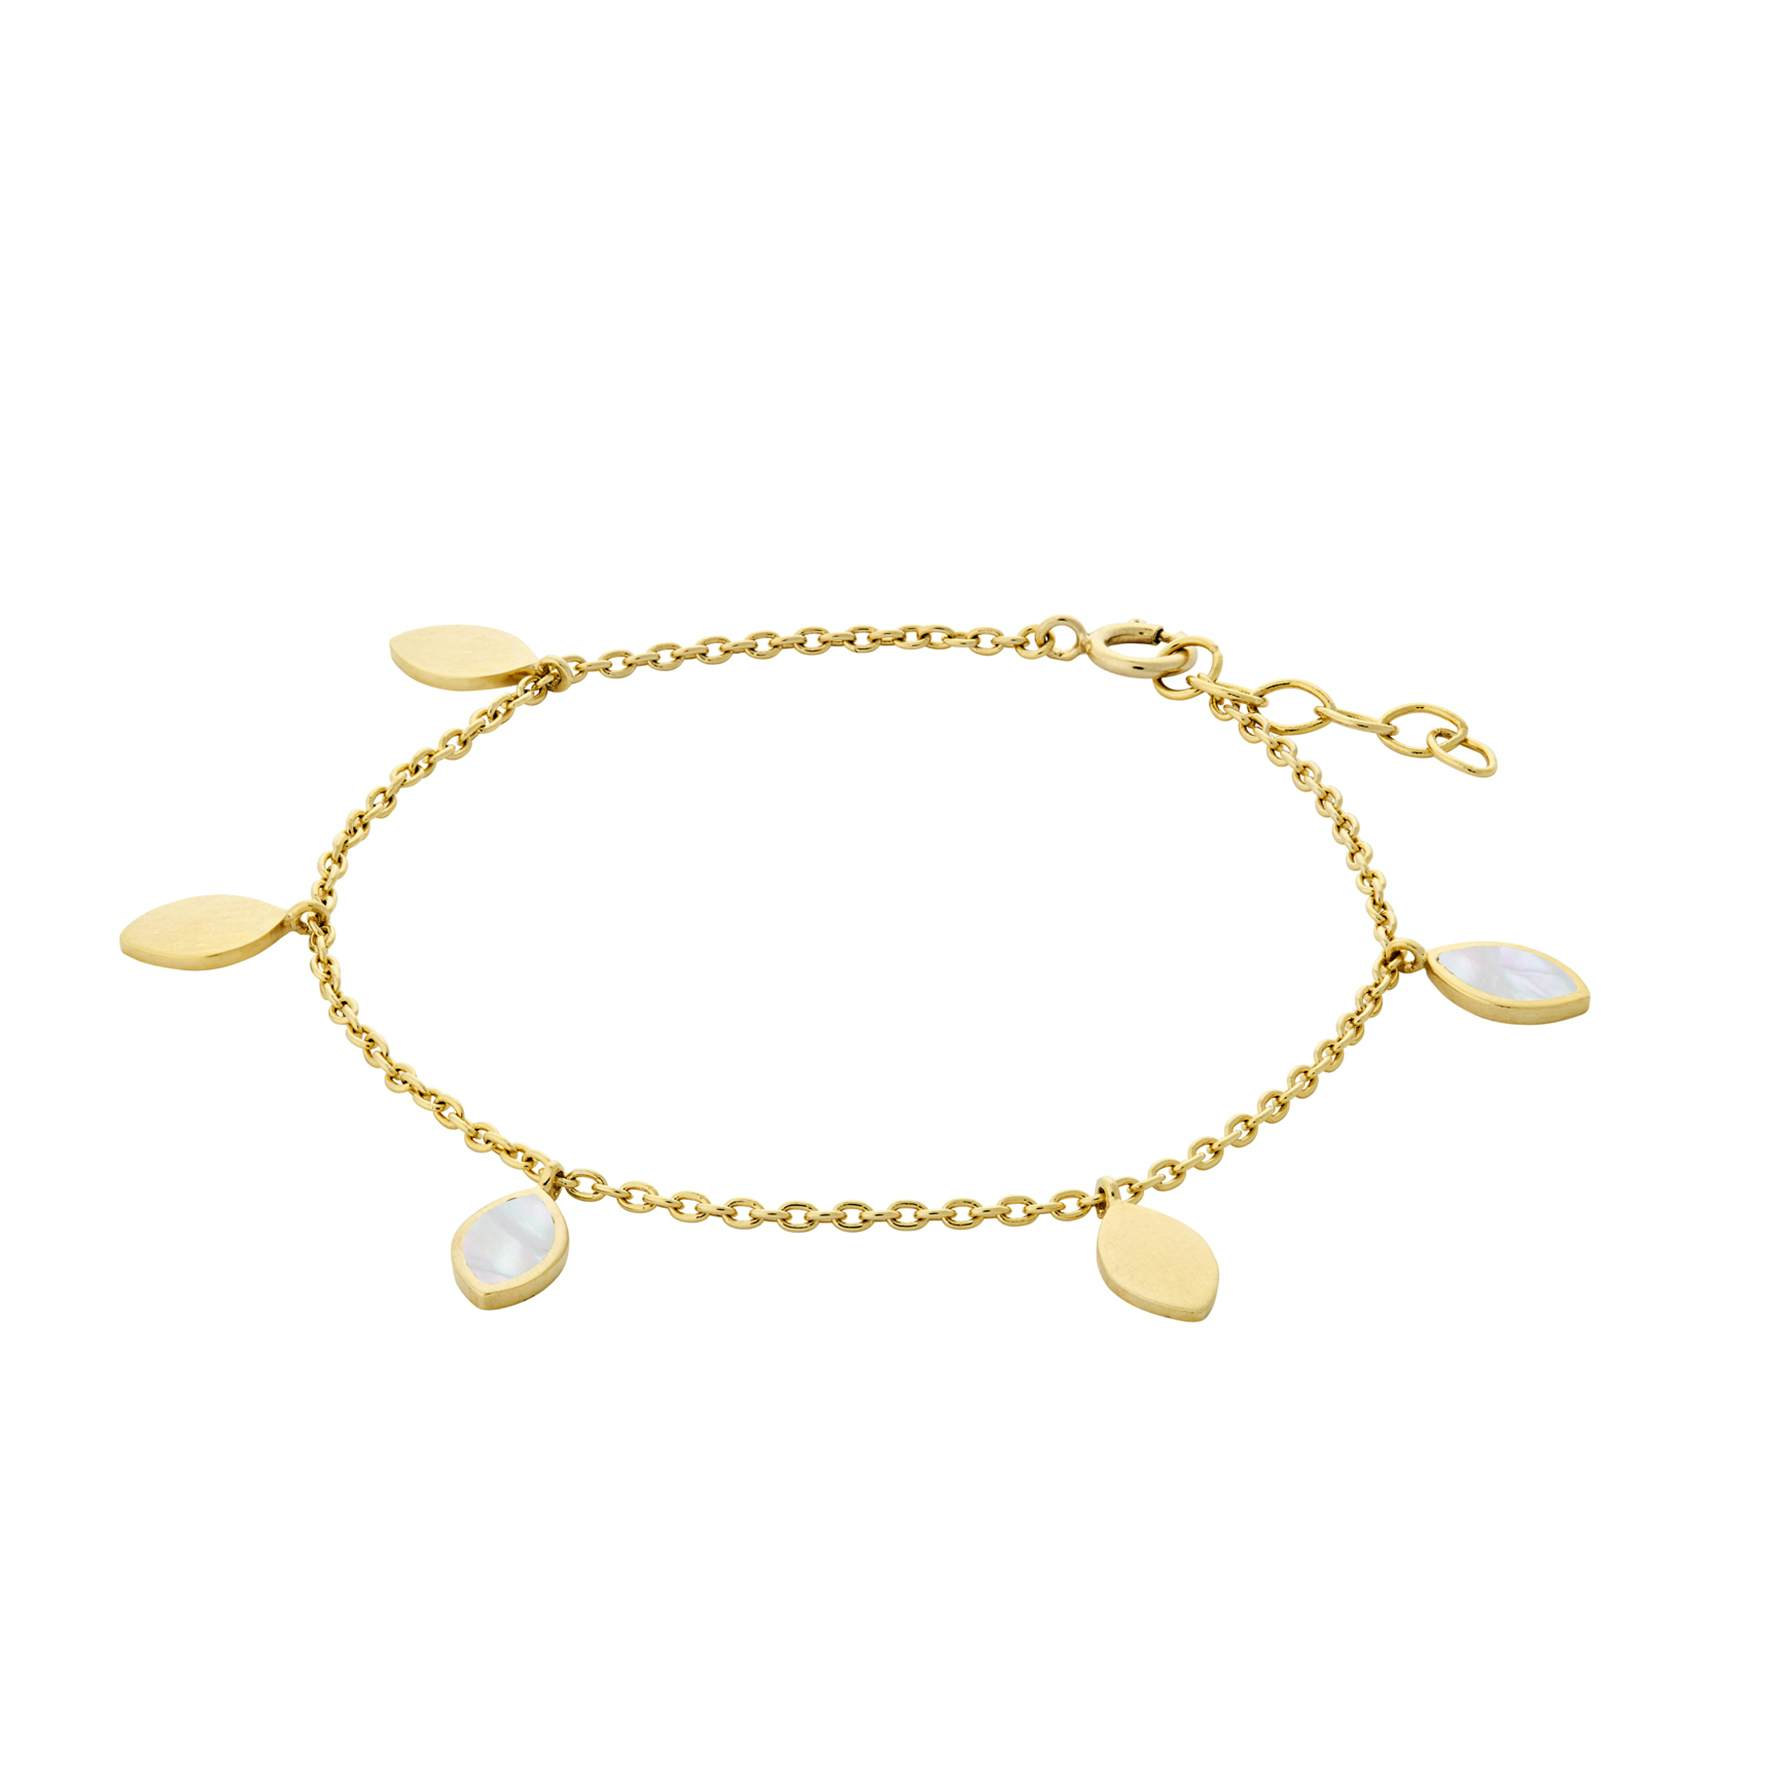 Flake Bracelet from Pernille Corydon in Goldplated-Silver Sterling 925